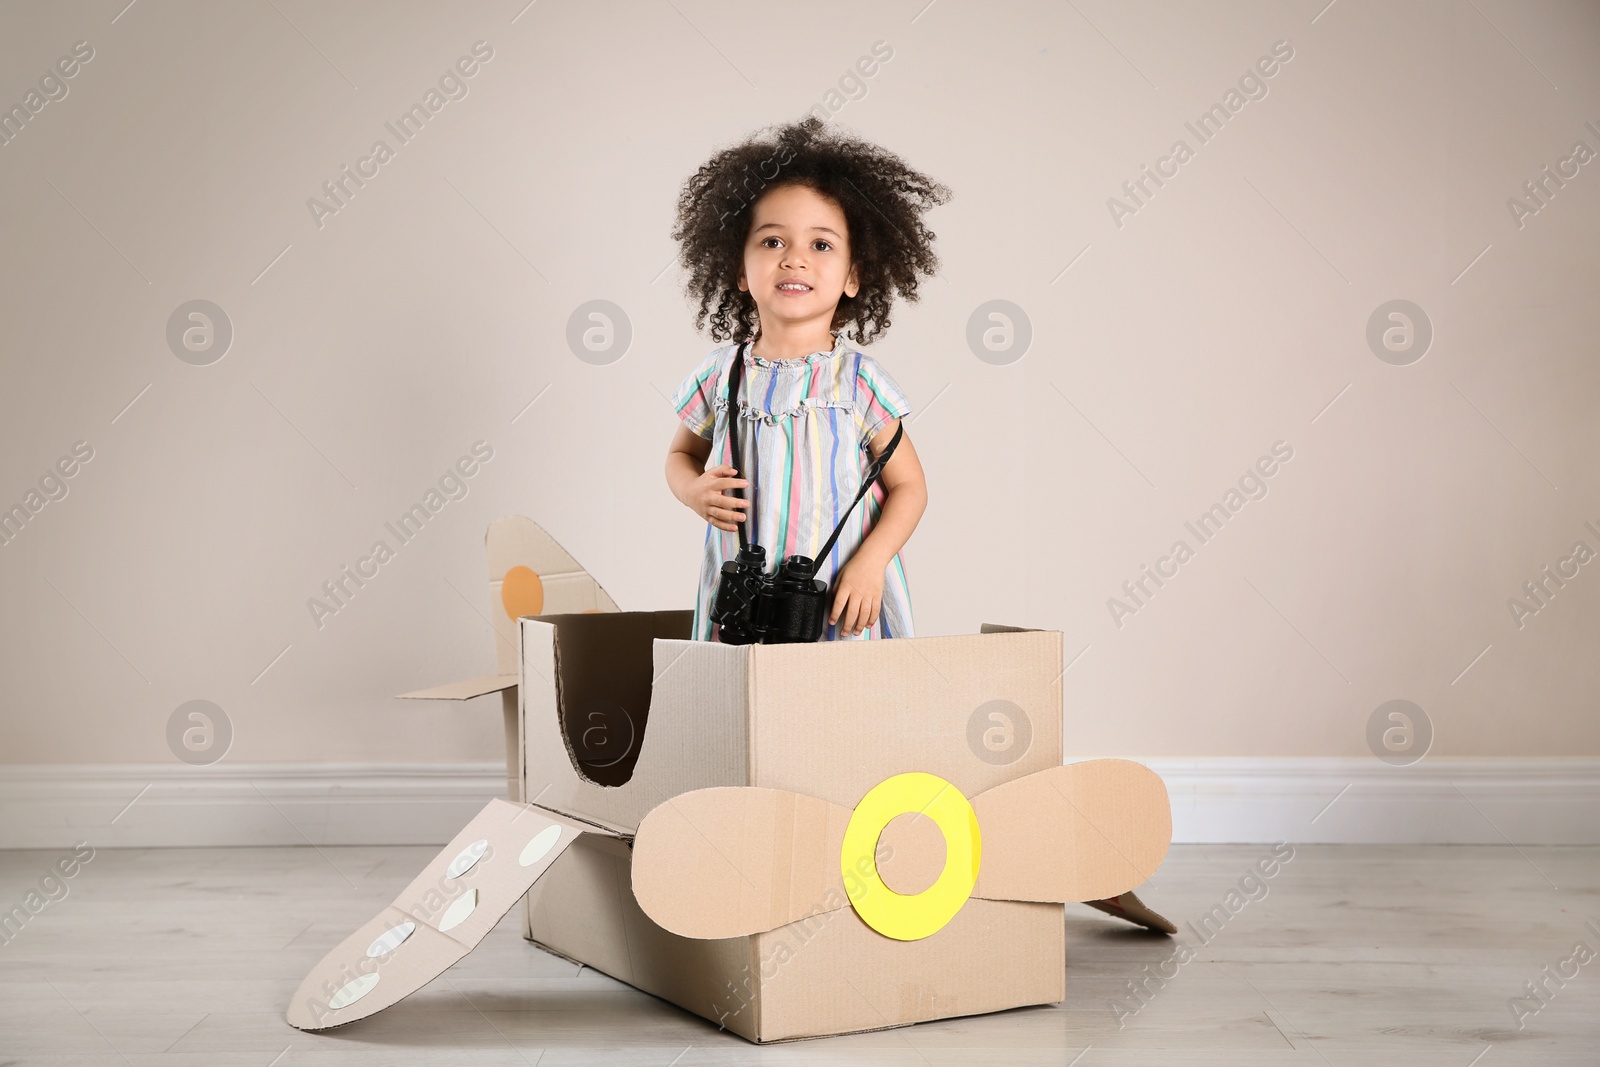 Photo of Cute African American child playing with cardboard plane and binoculars near beige wall